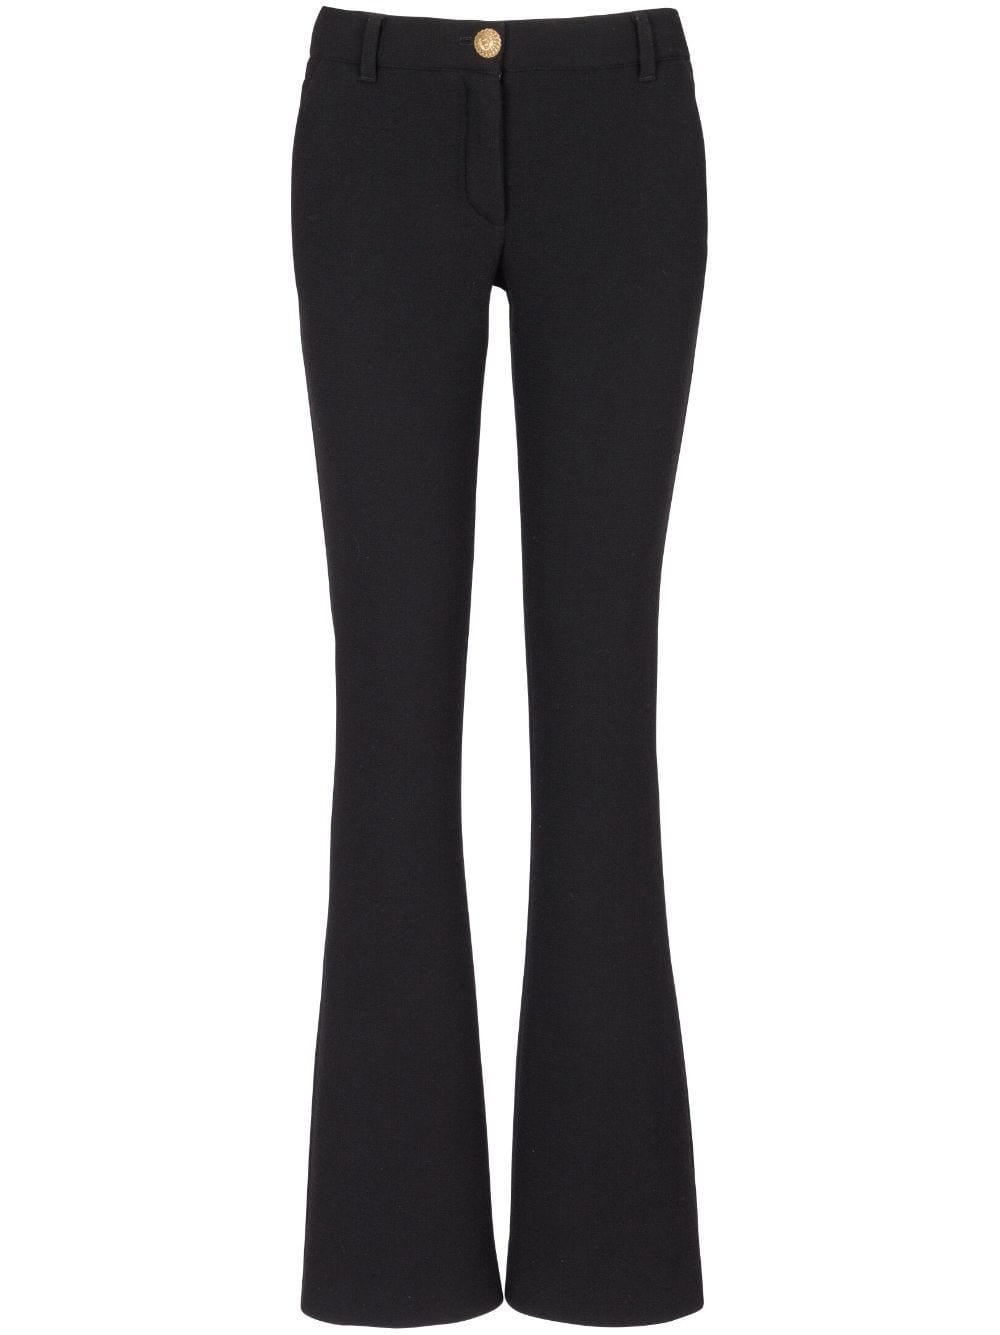 Chic Black Crepe Texture Flared Trousers for Women